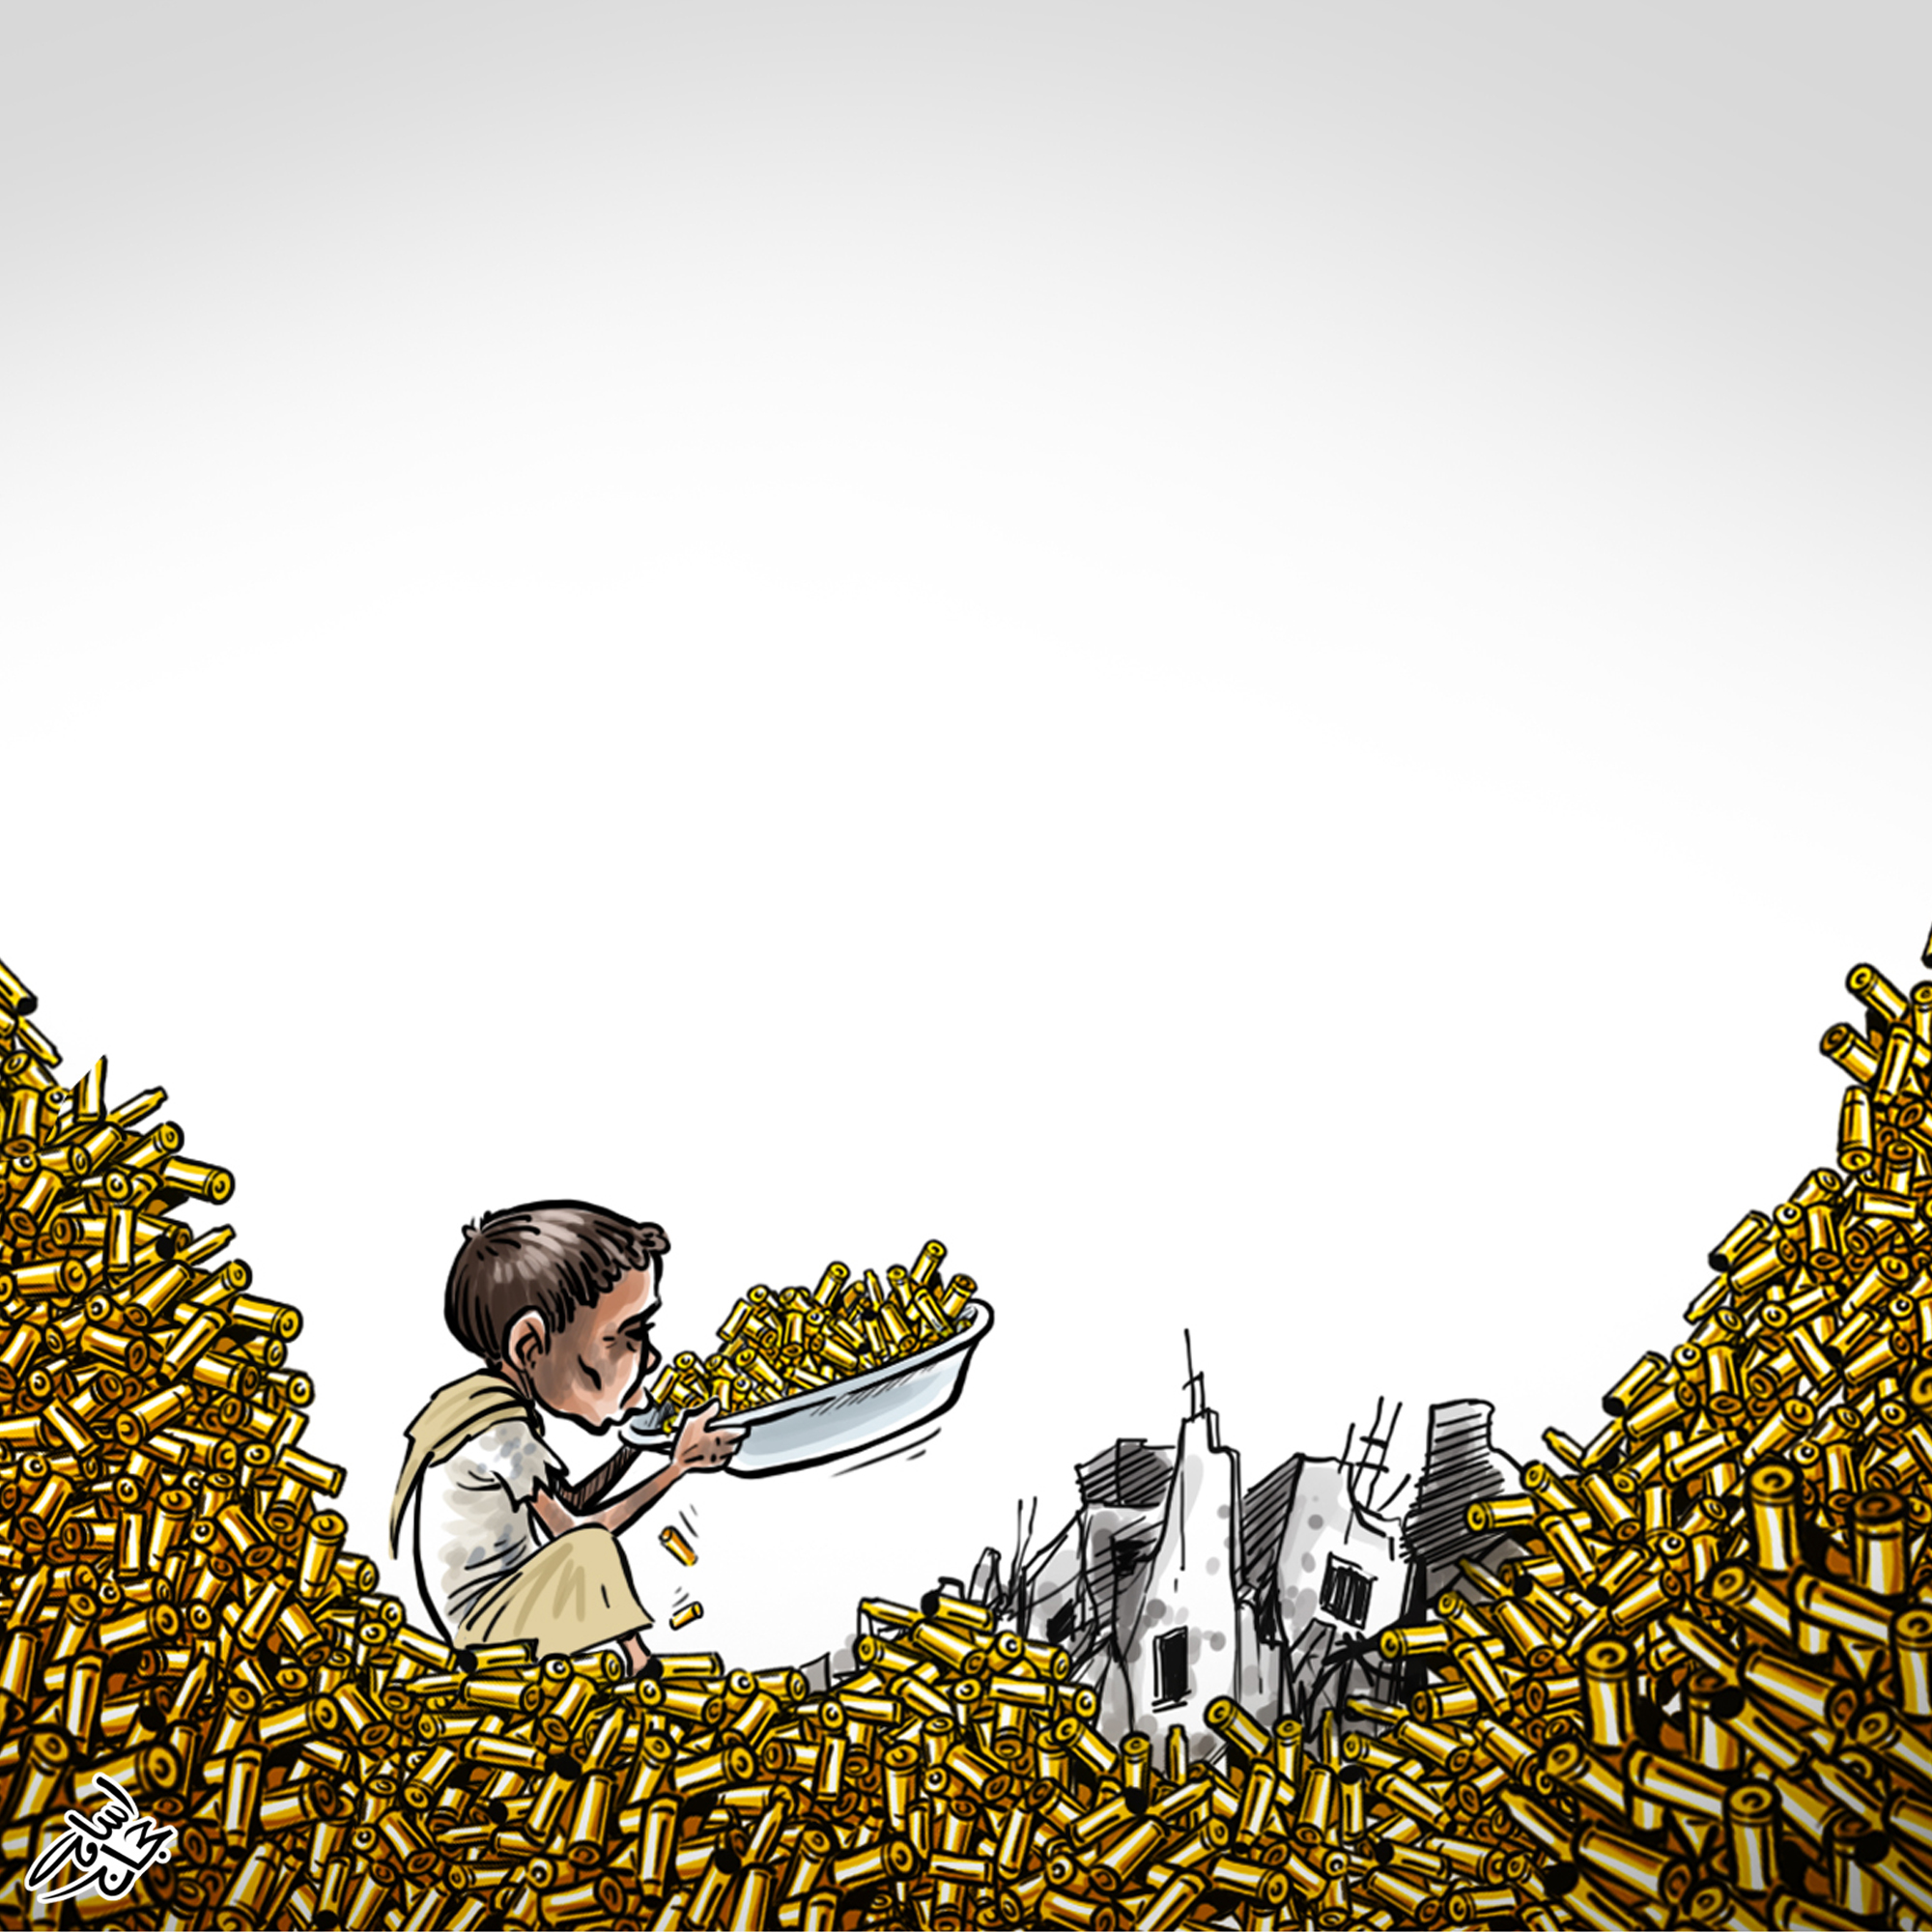 Ill-looking child holding a bowl of bullets to their lips, sitting between a mountain of bullets and destroyed building in background.